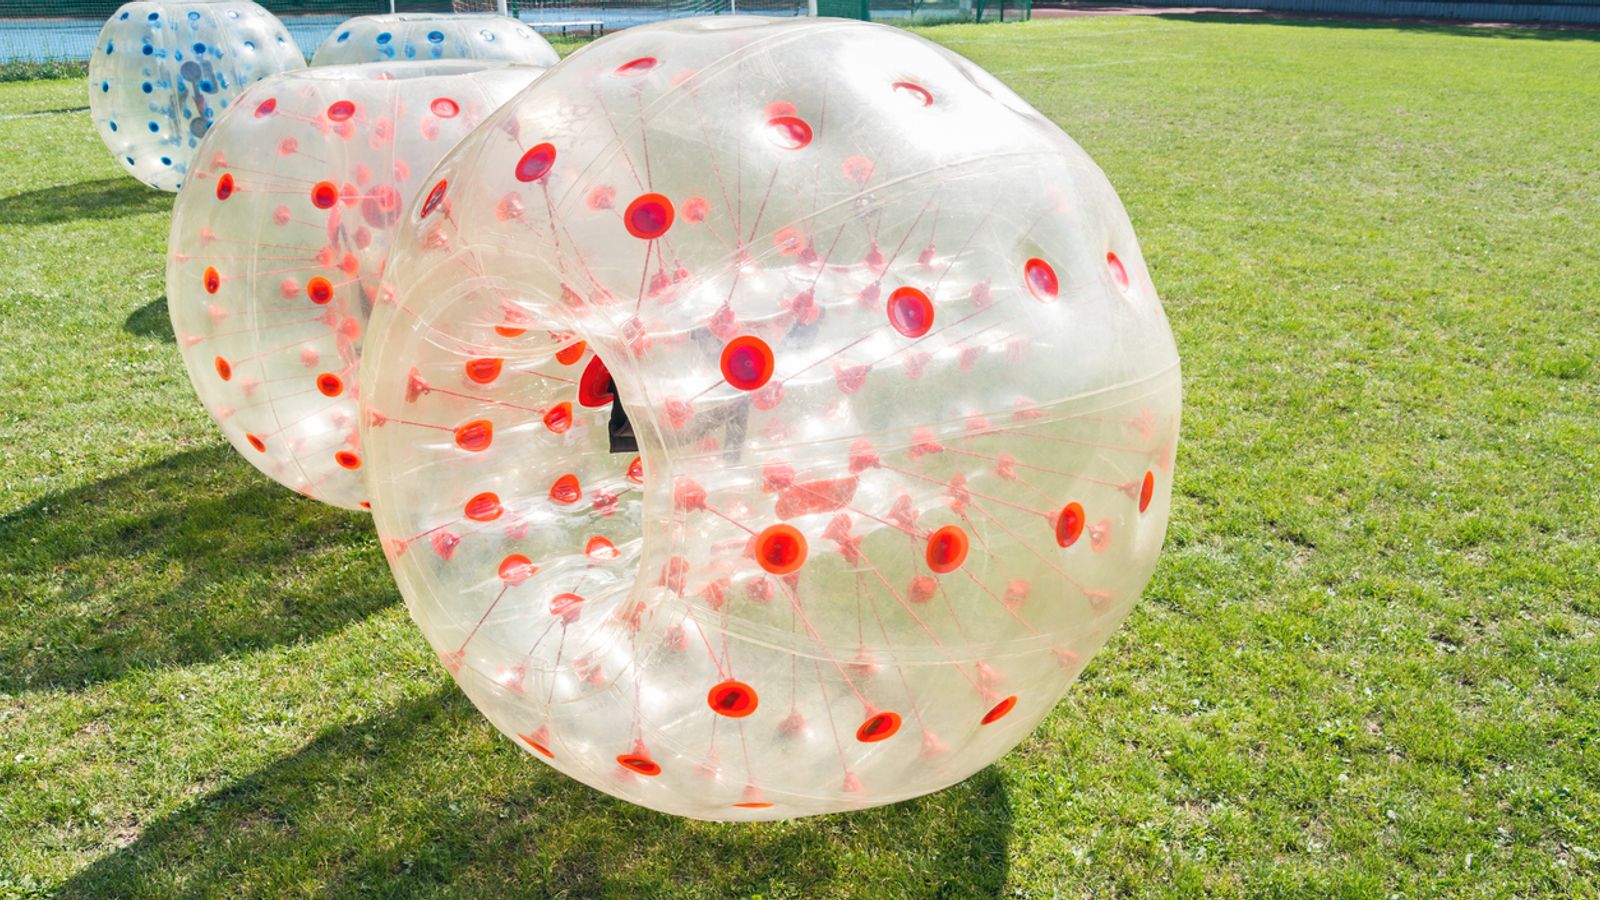 Boy, 9, seriously injured after inflatable zorb ball blown off pool in Southport park